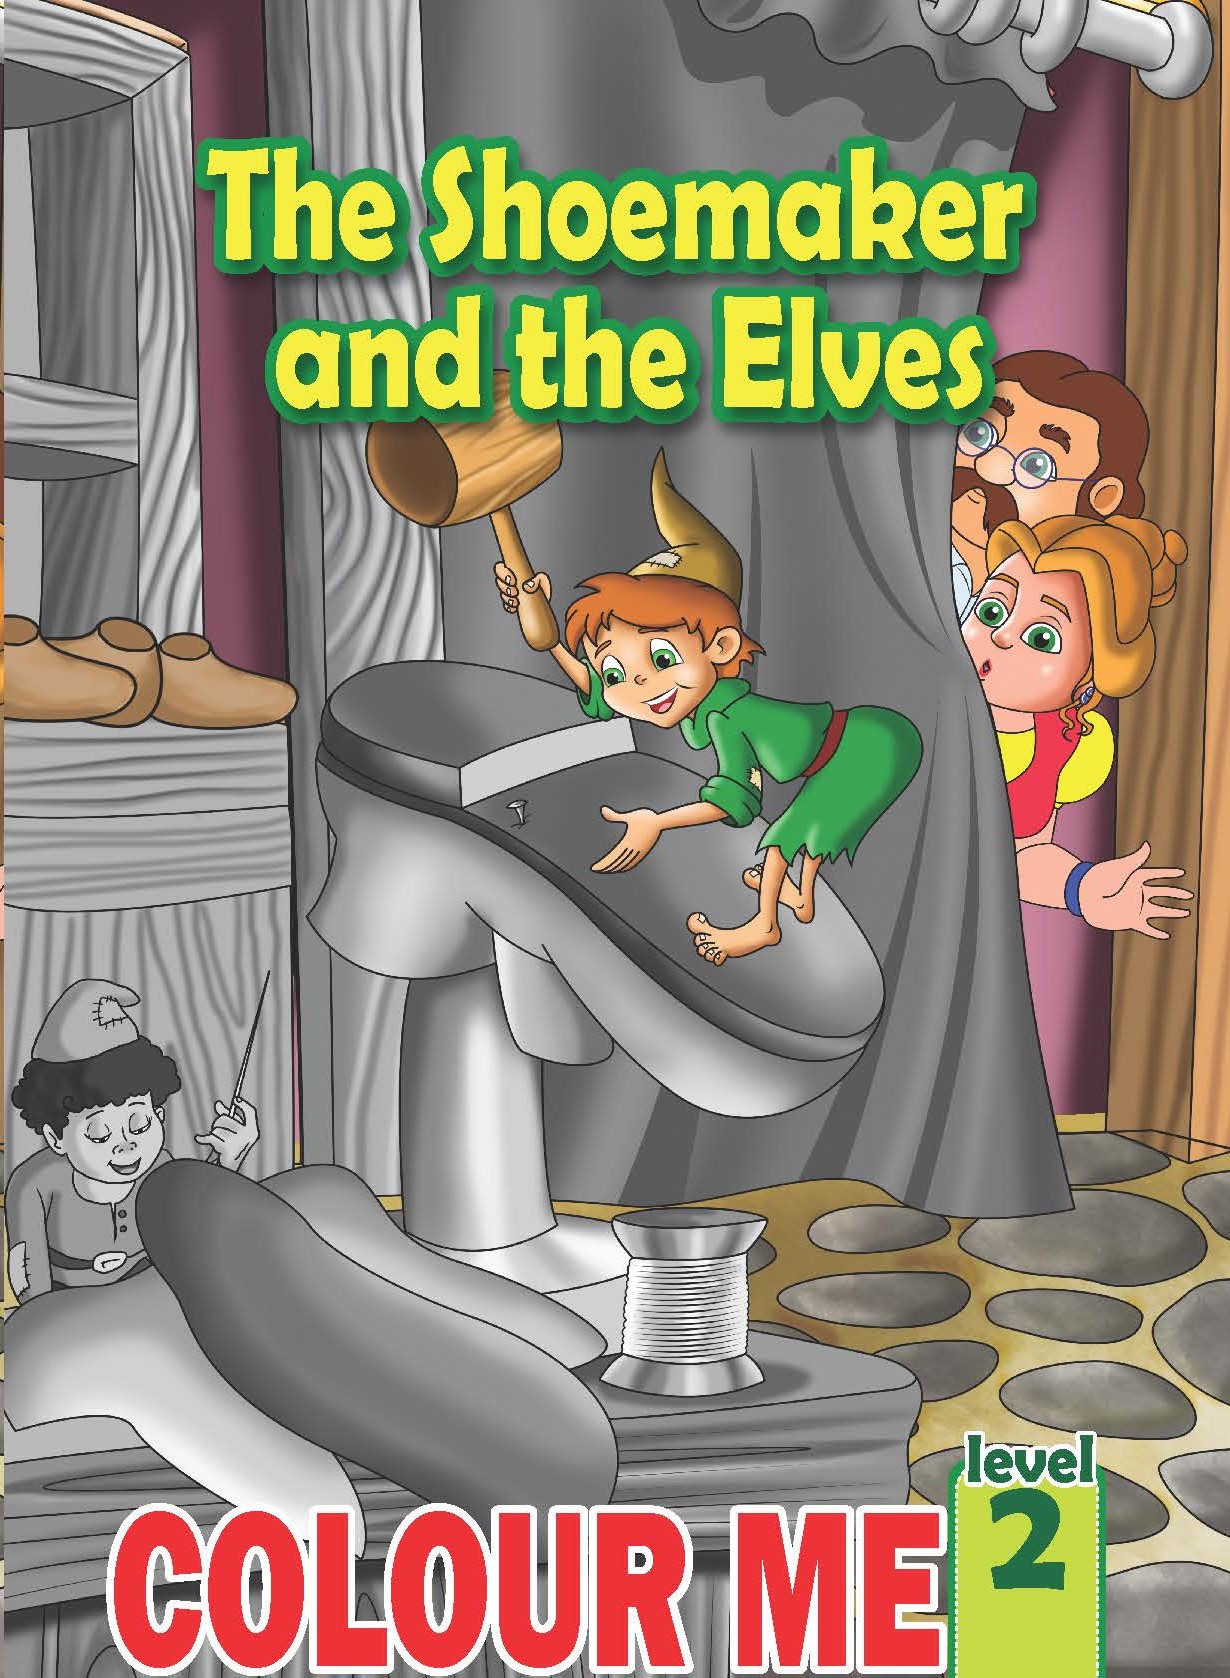 The Shoemaker and the Elves      COLOUR ME